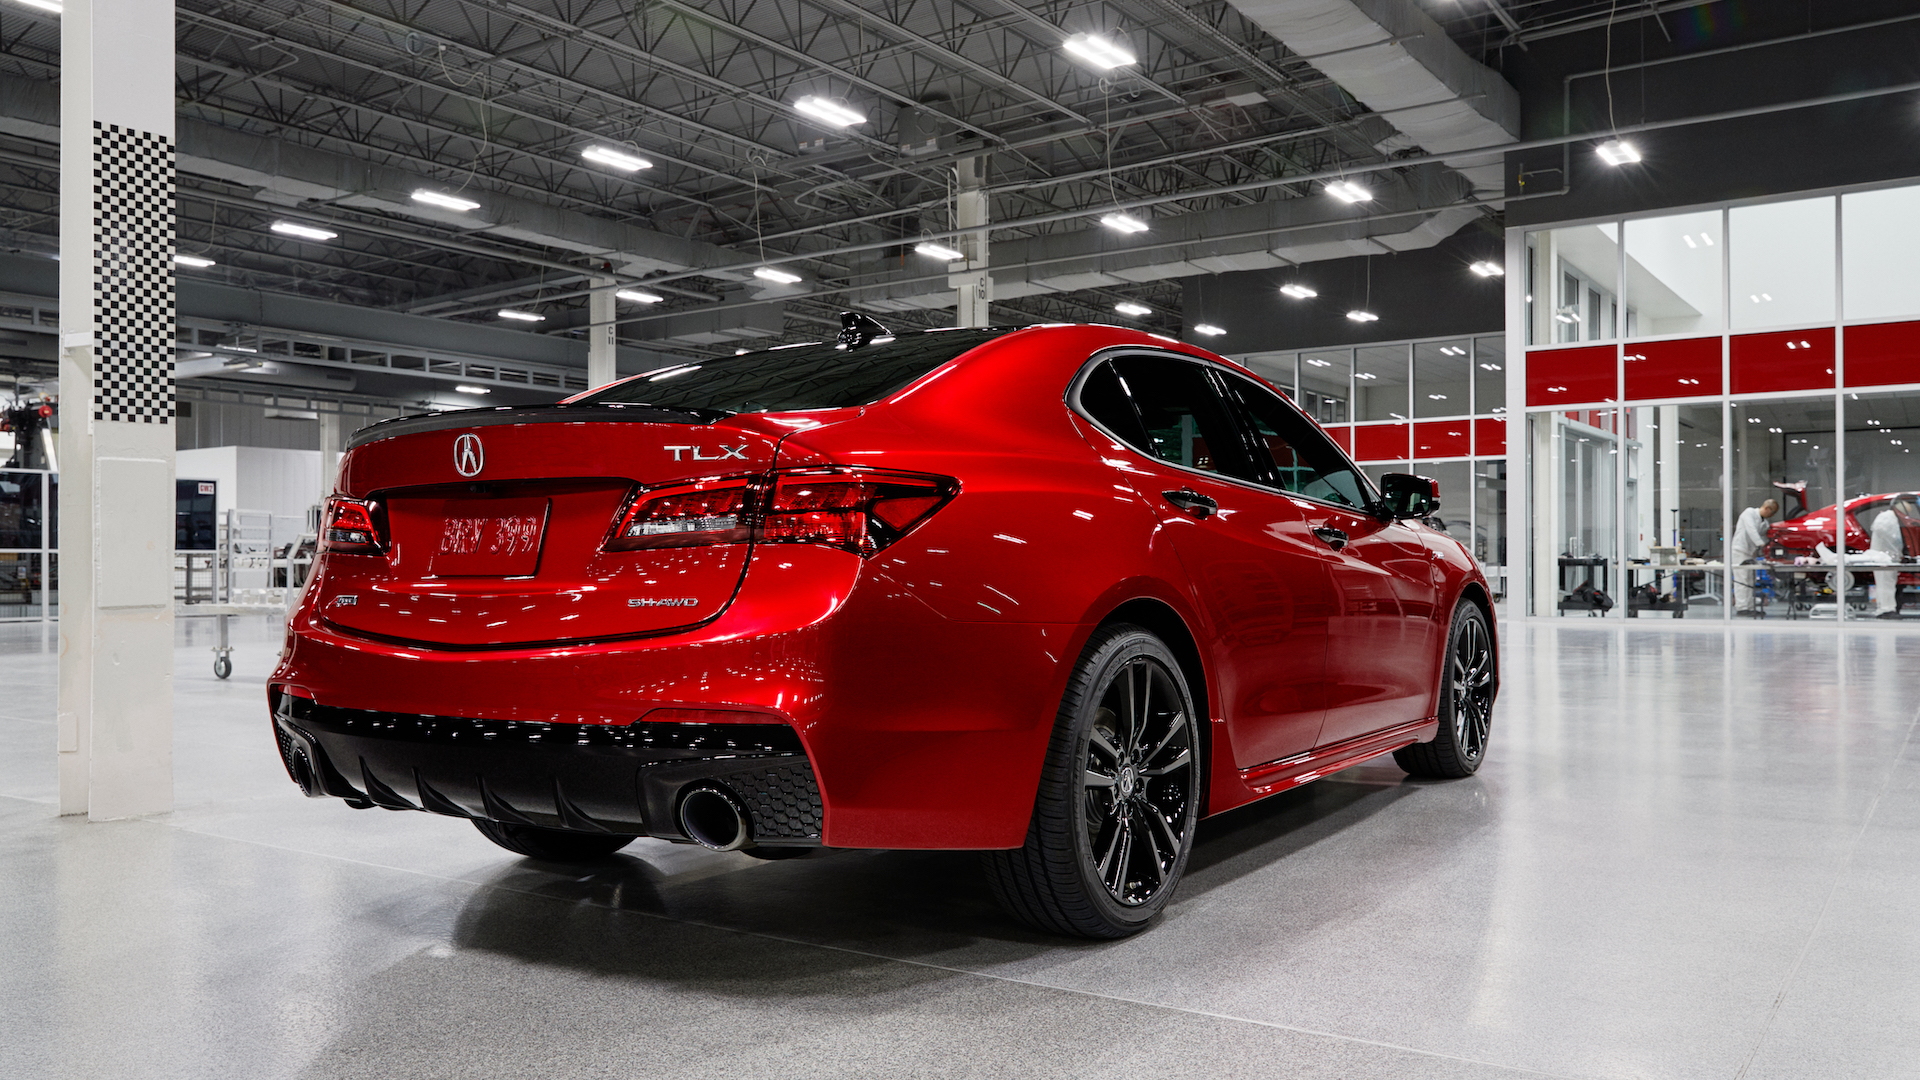 2020 Acura TLX PMC edition